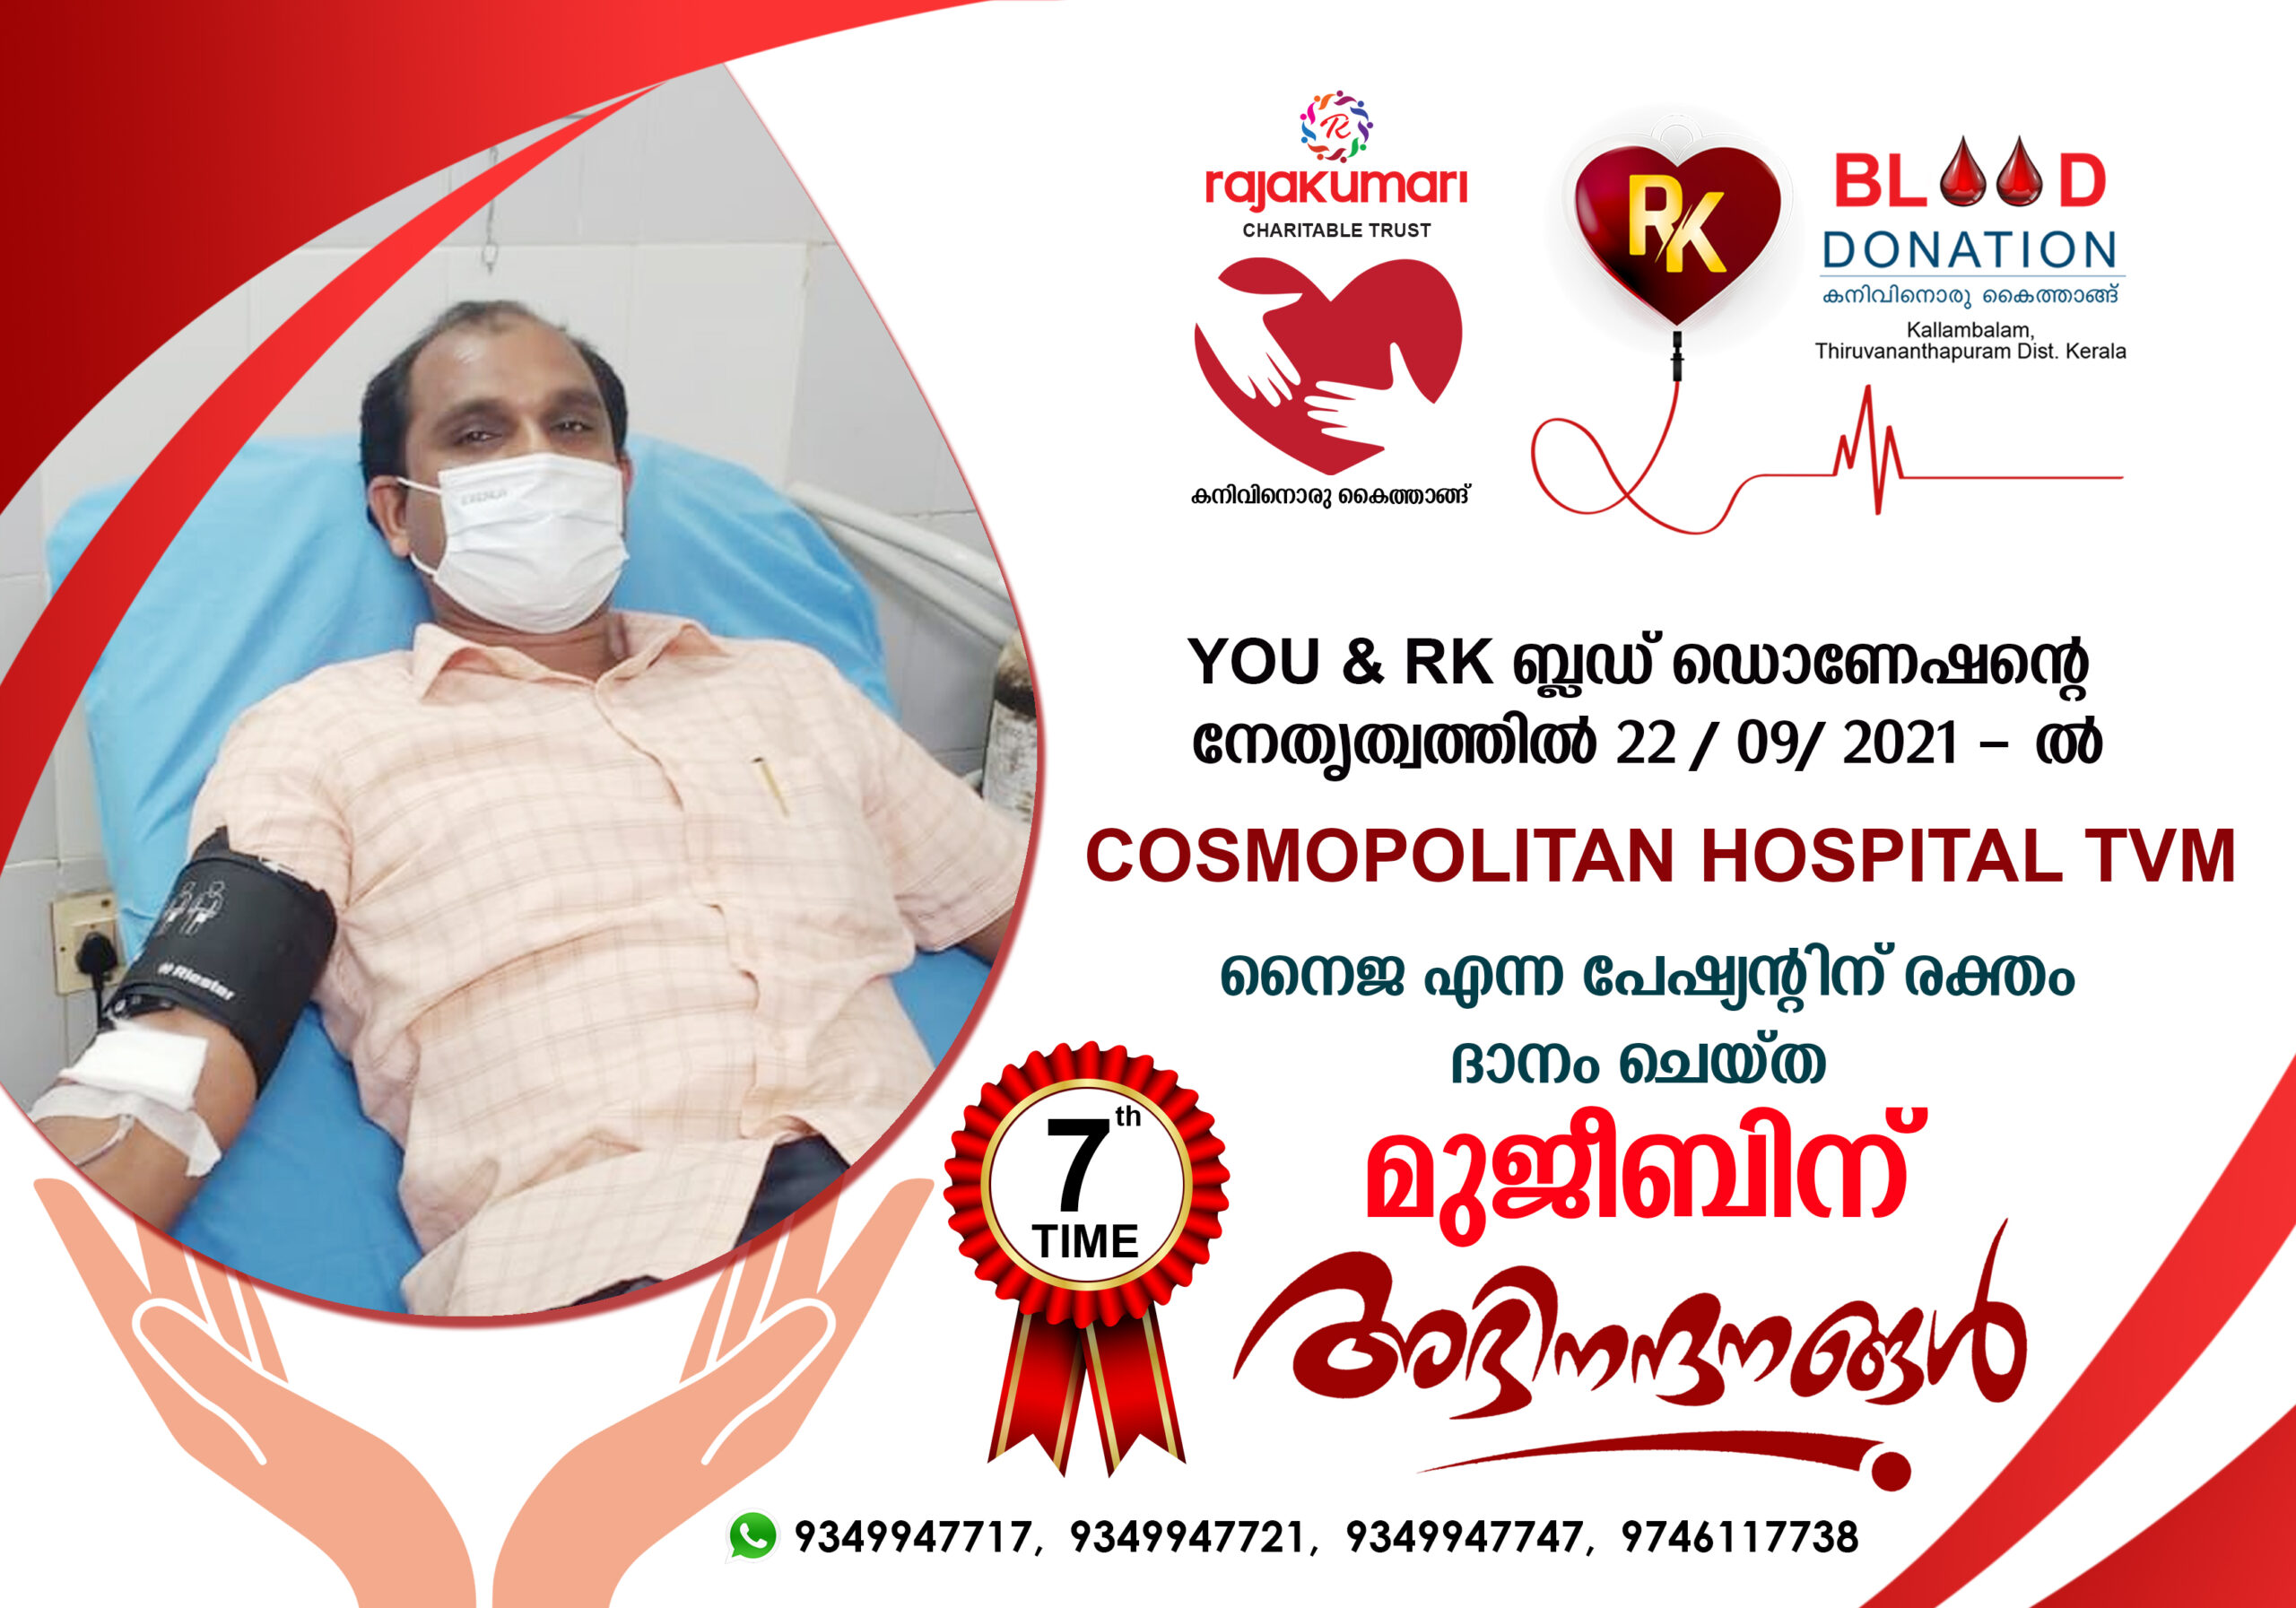 BLOOD DONOR FOR THE MONTH OF SEPTEMBER